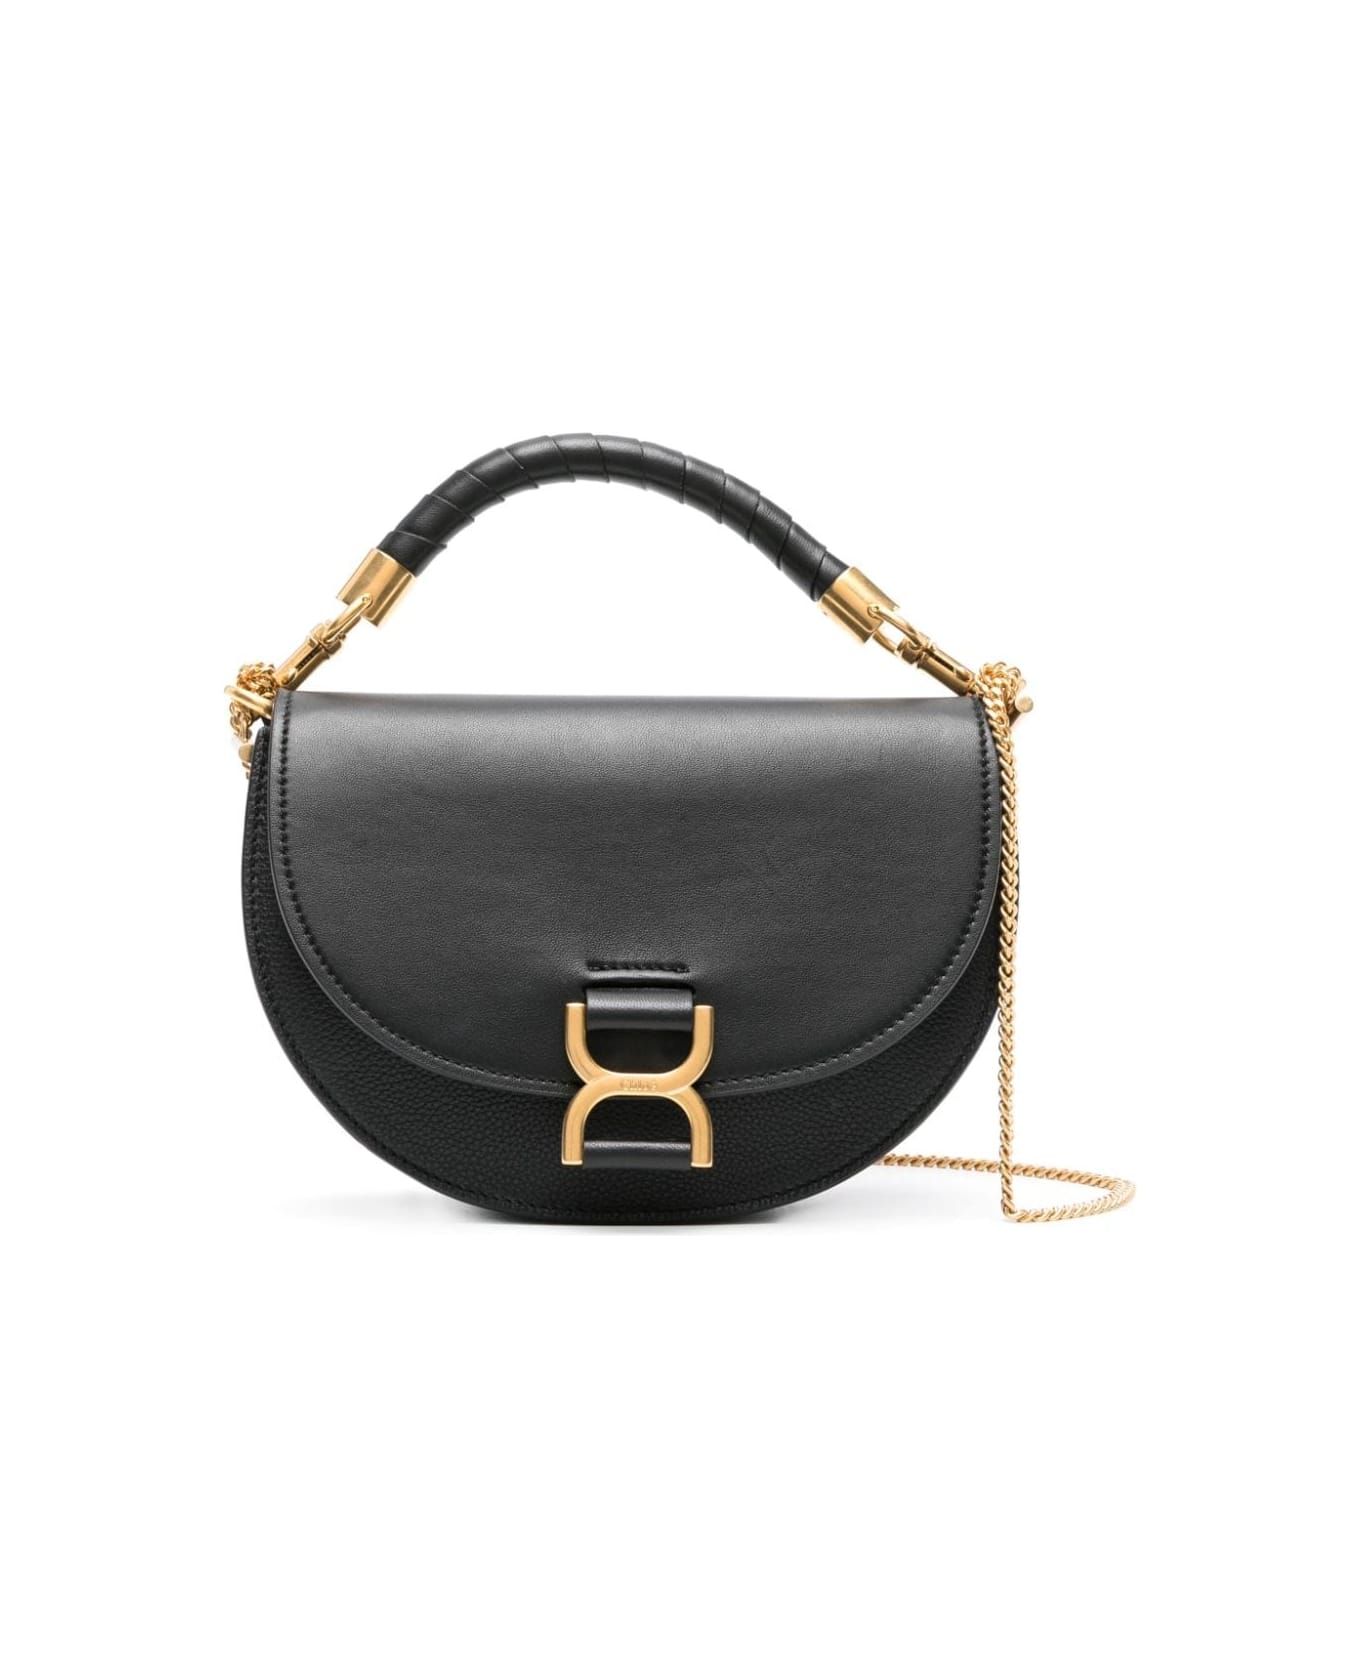 Chloé Black Marcie Bag With Flap And Chain - Black